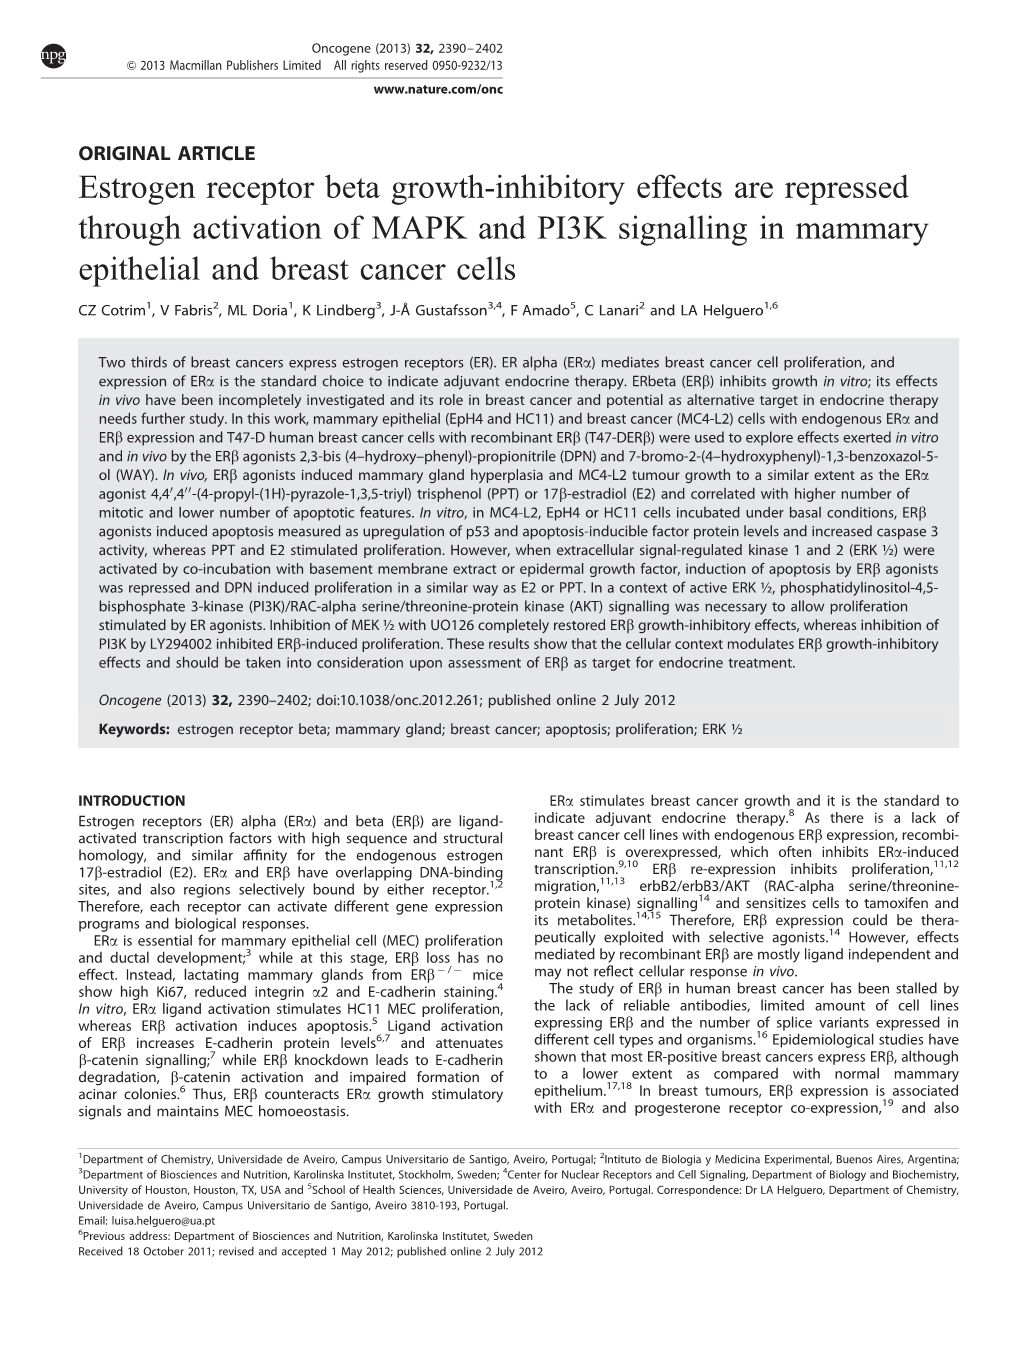 Estrogen Receptor Beta Growth-Inhibitory Effects Are Repressed Through Activation of MAPK and PI3K Signalling in Mammary Epithelial and Breast Cancer Cells